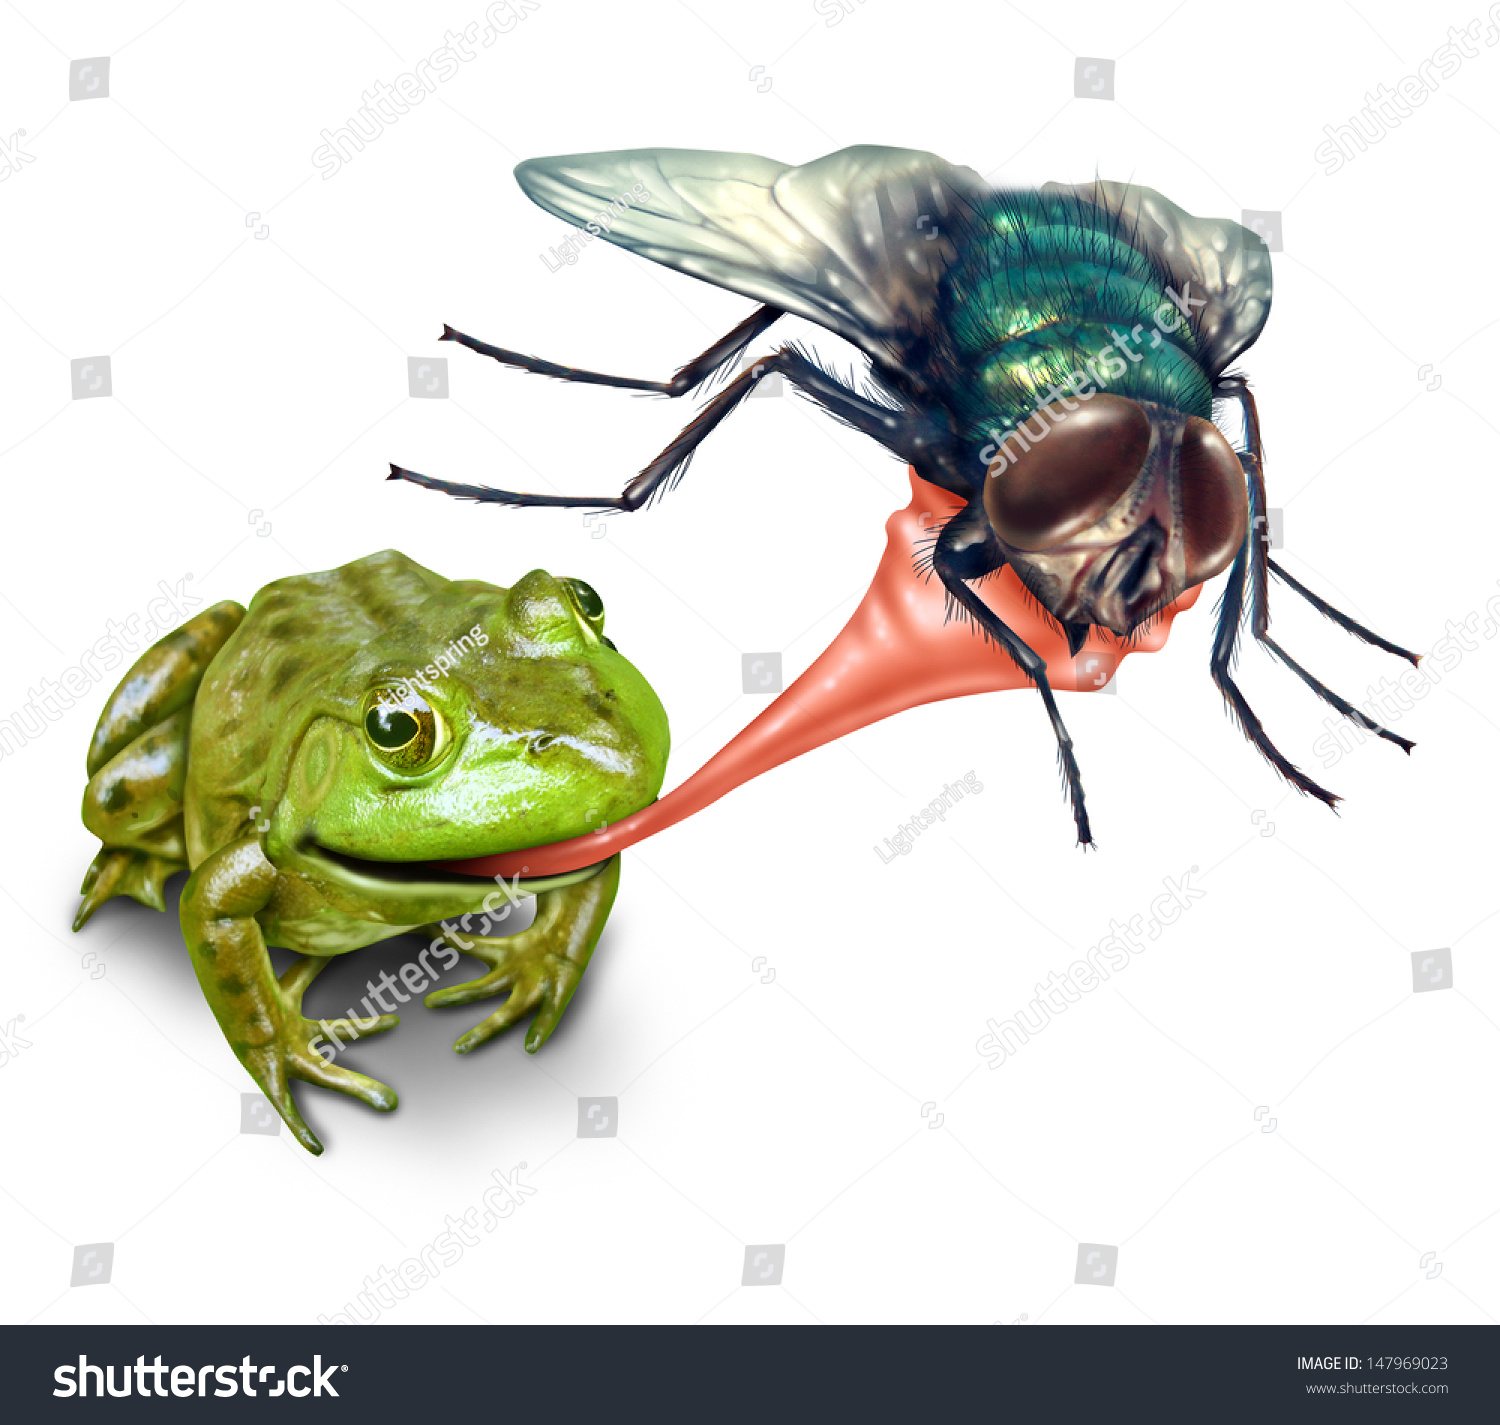 Image result for toad eating a fly